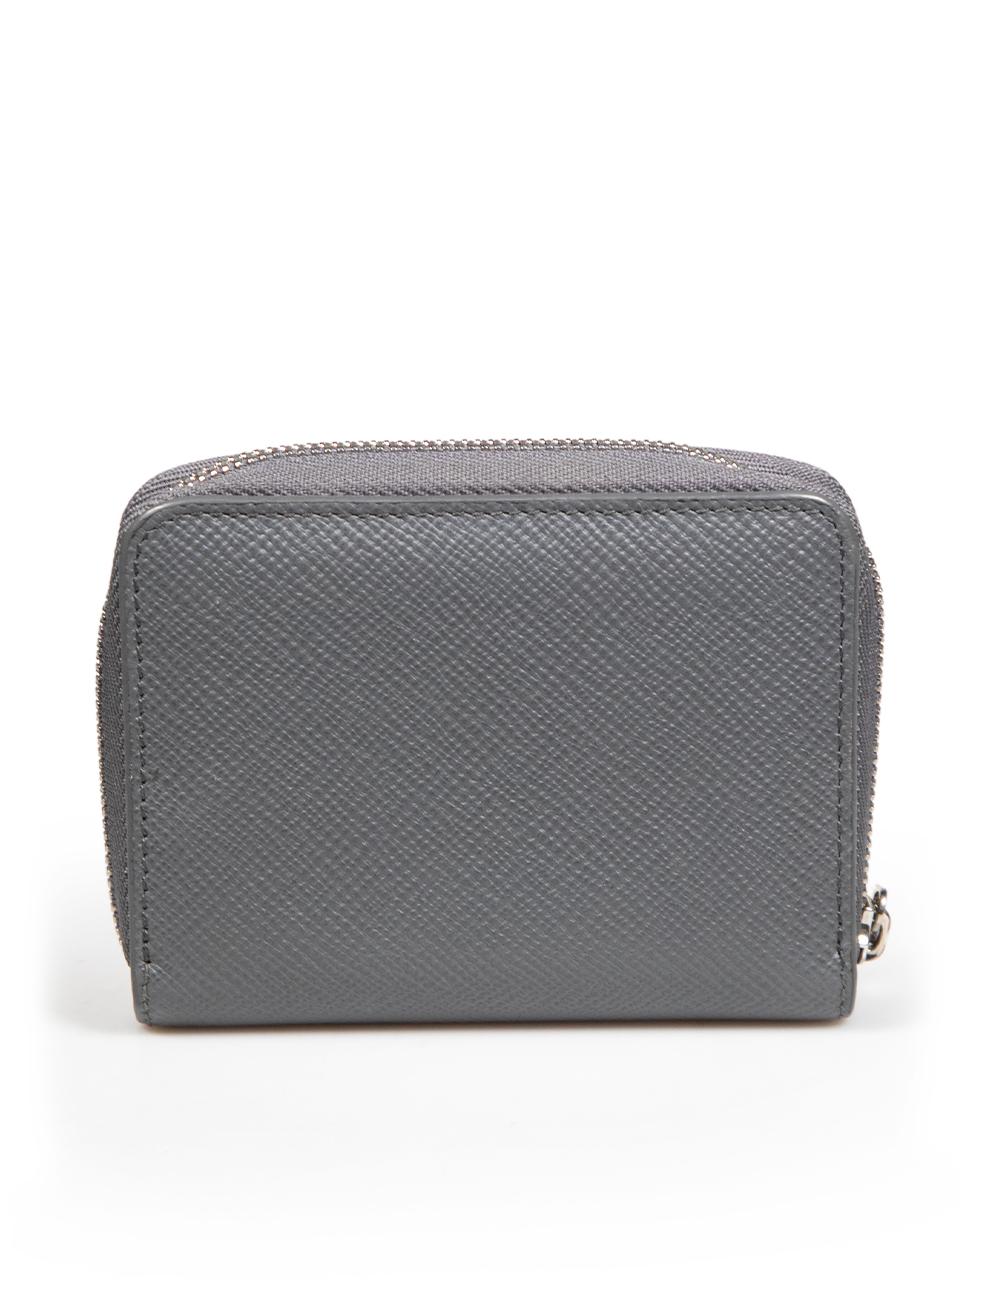 Smythson Grey Leather Zip Wallet In Good Condition For Sale In London, GB